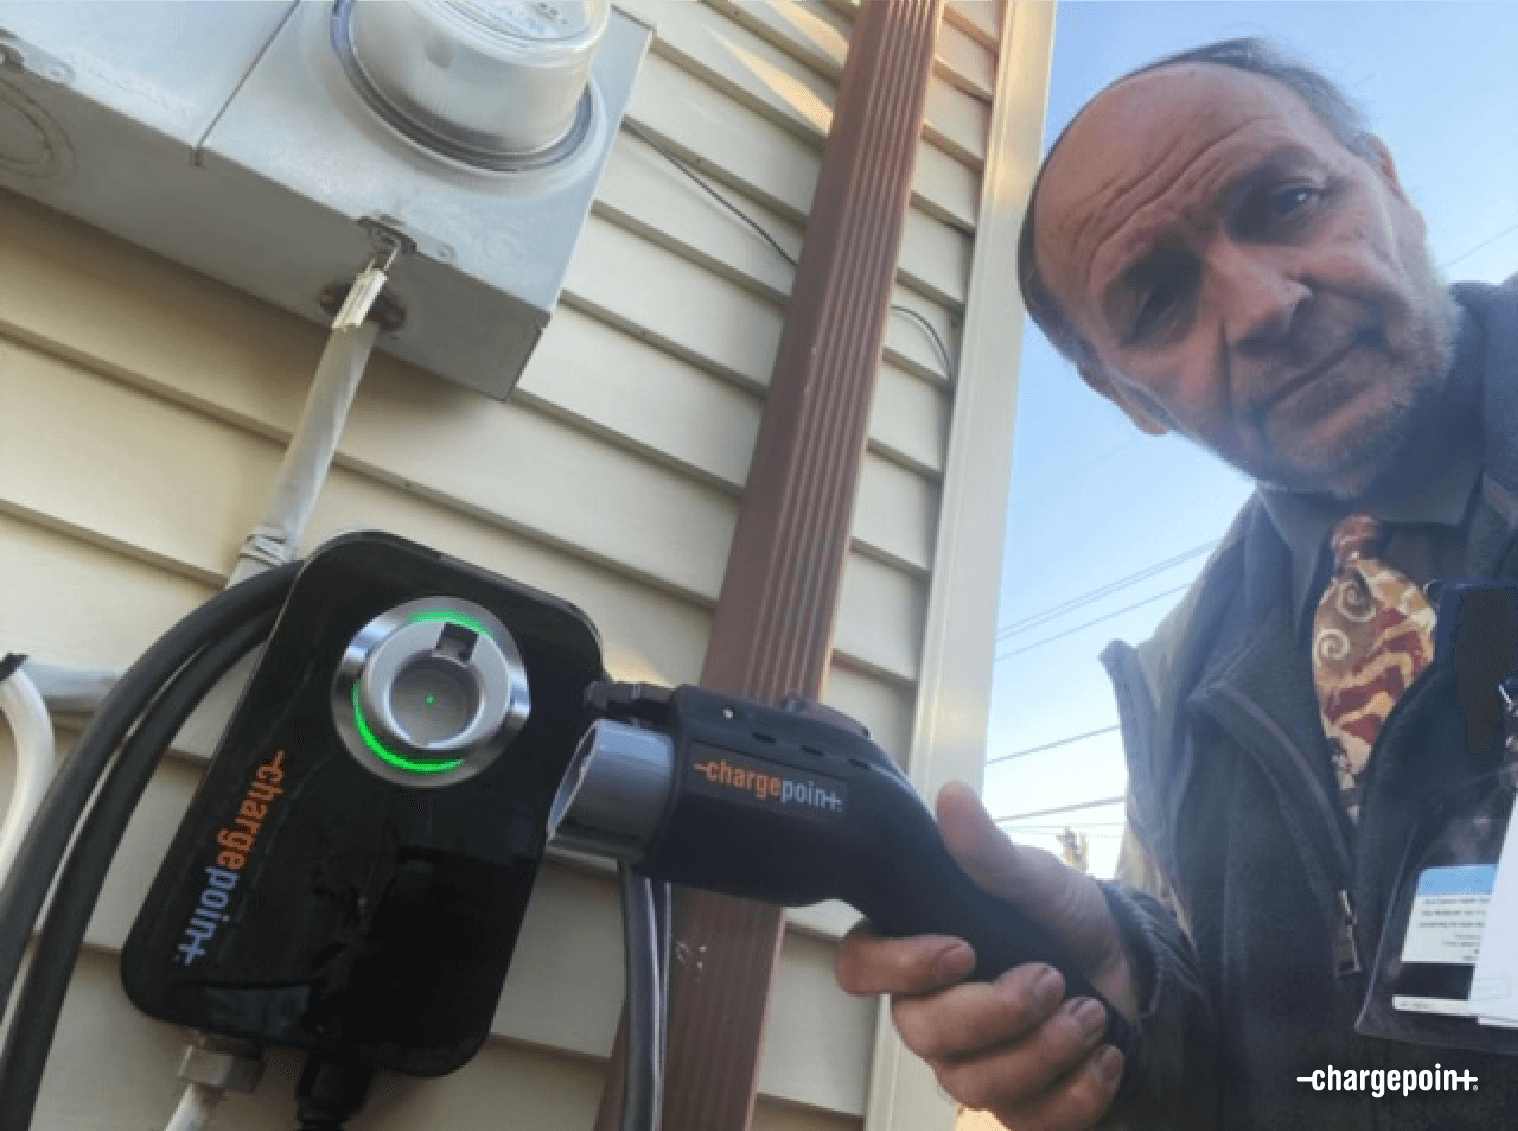 Using ChargePoint at home